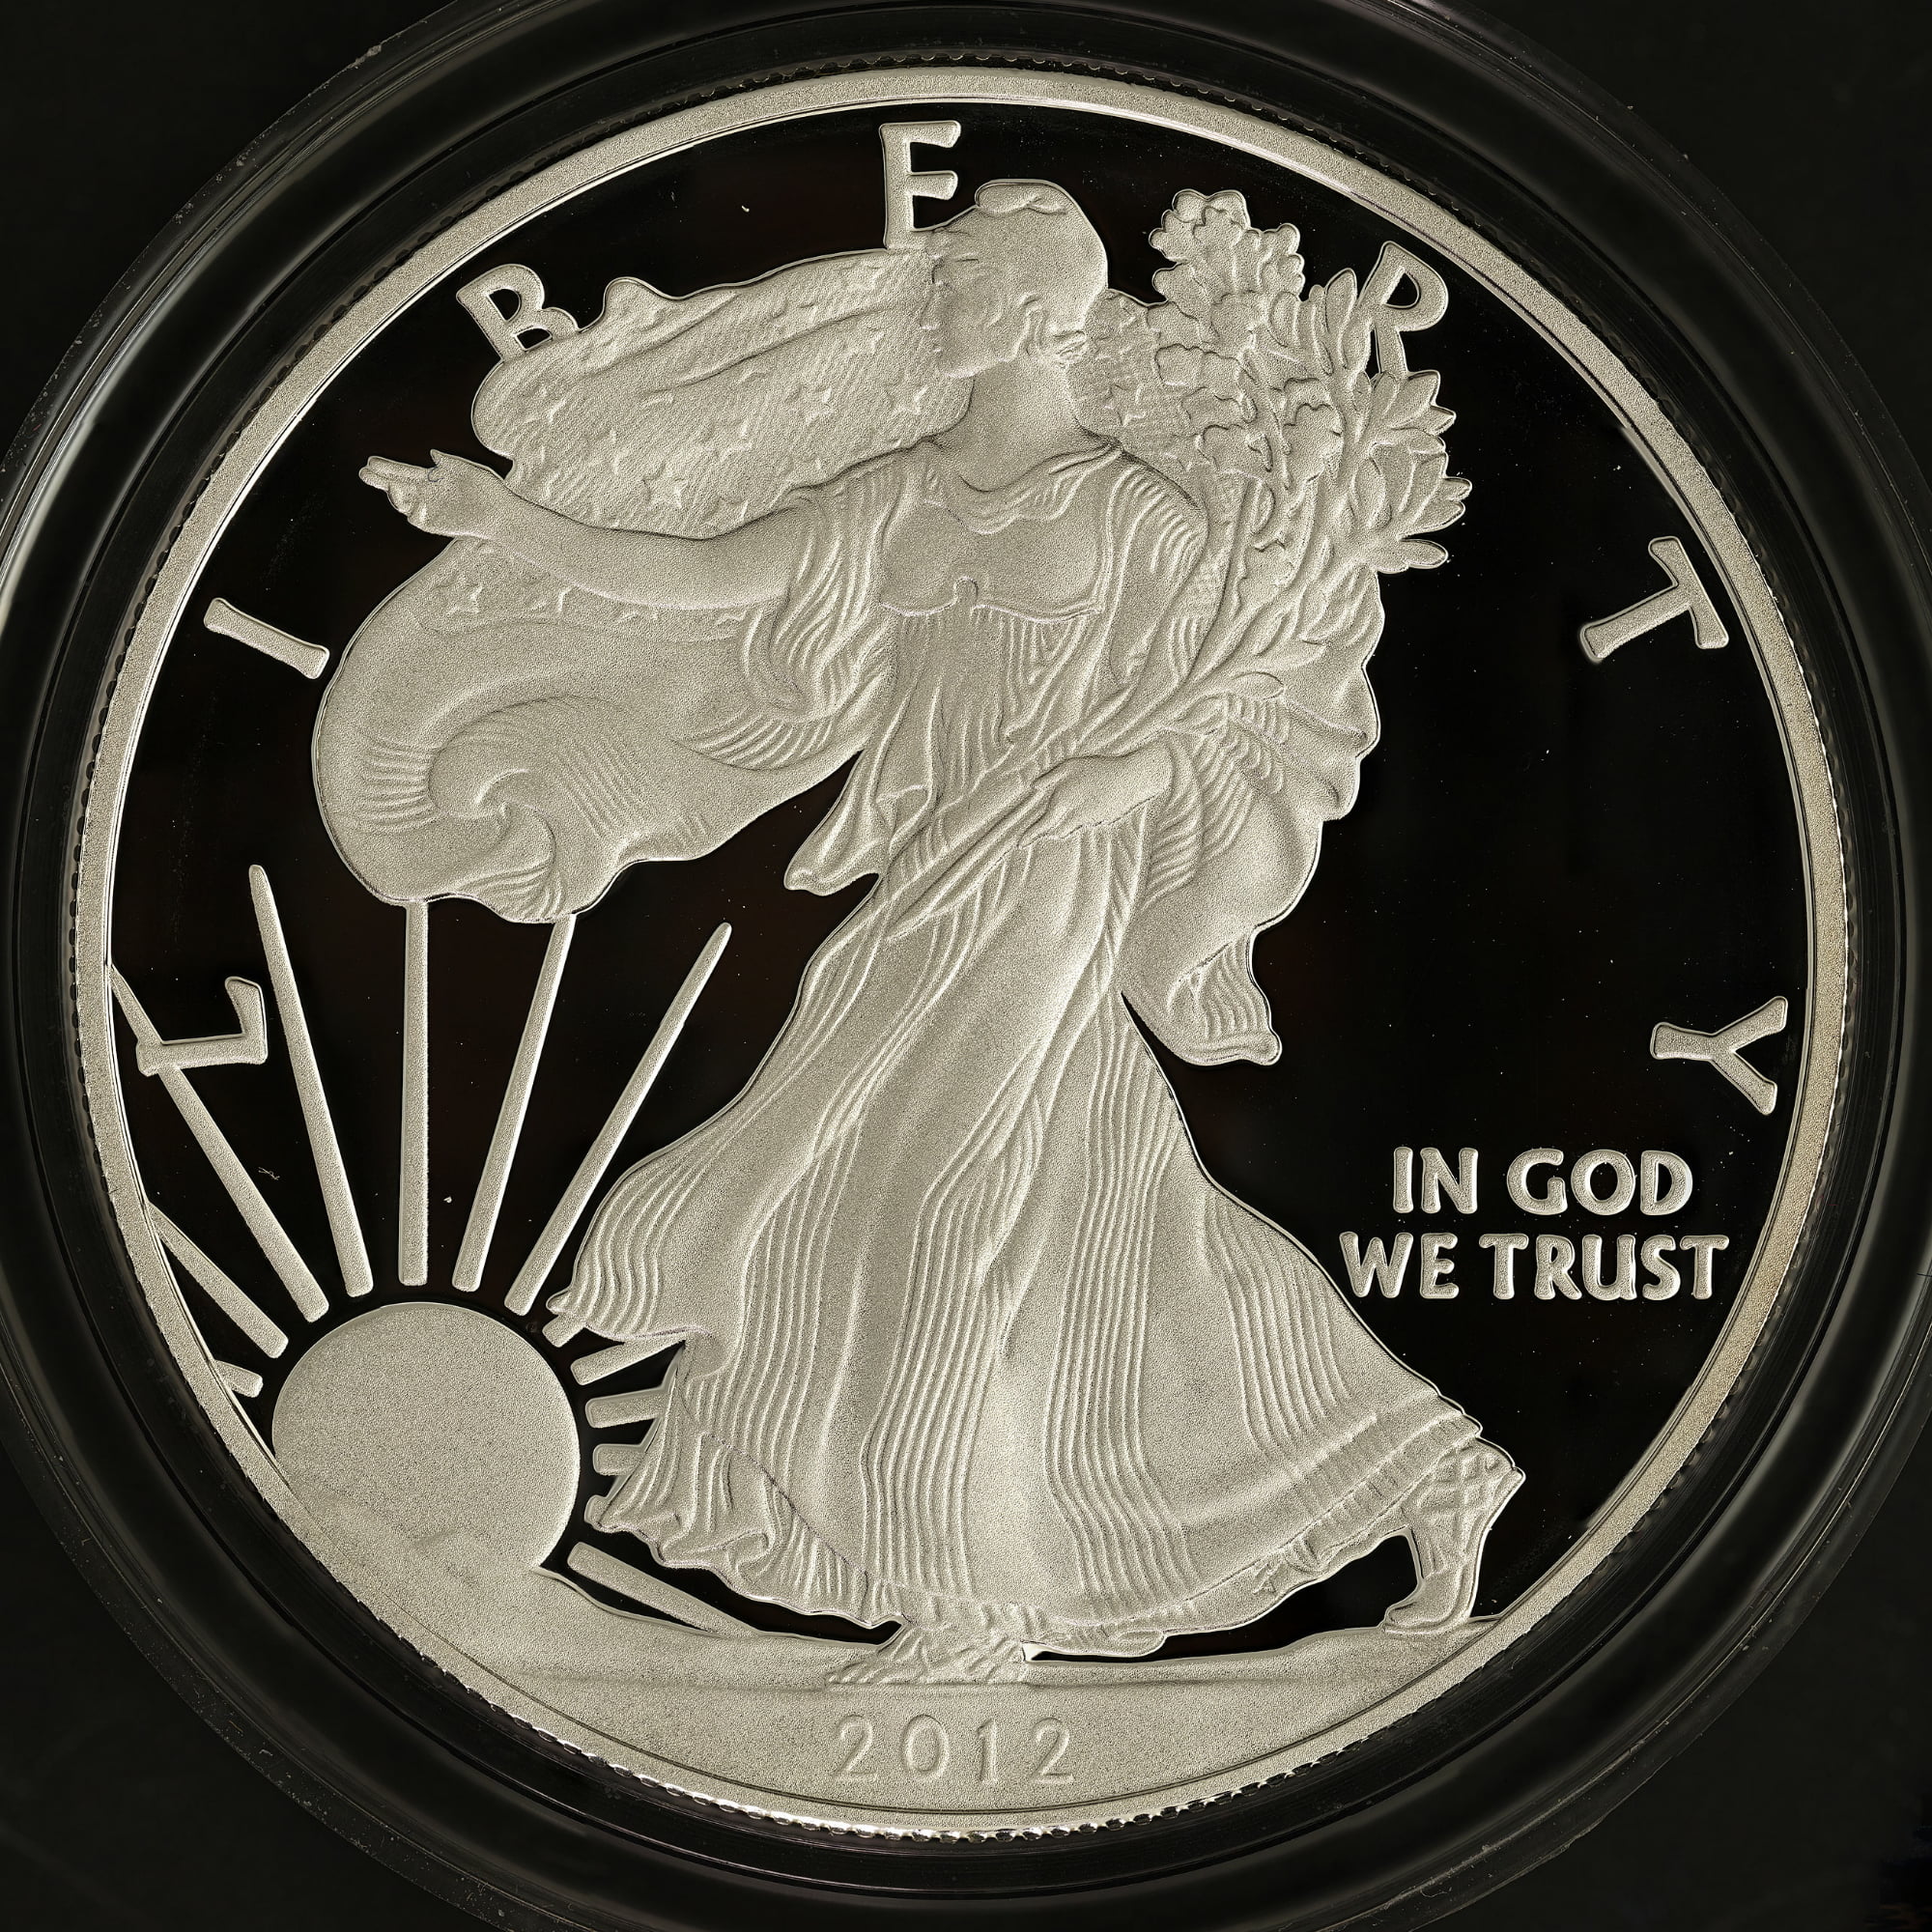 last united states silver coinage clock